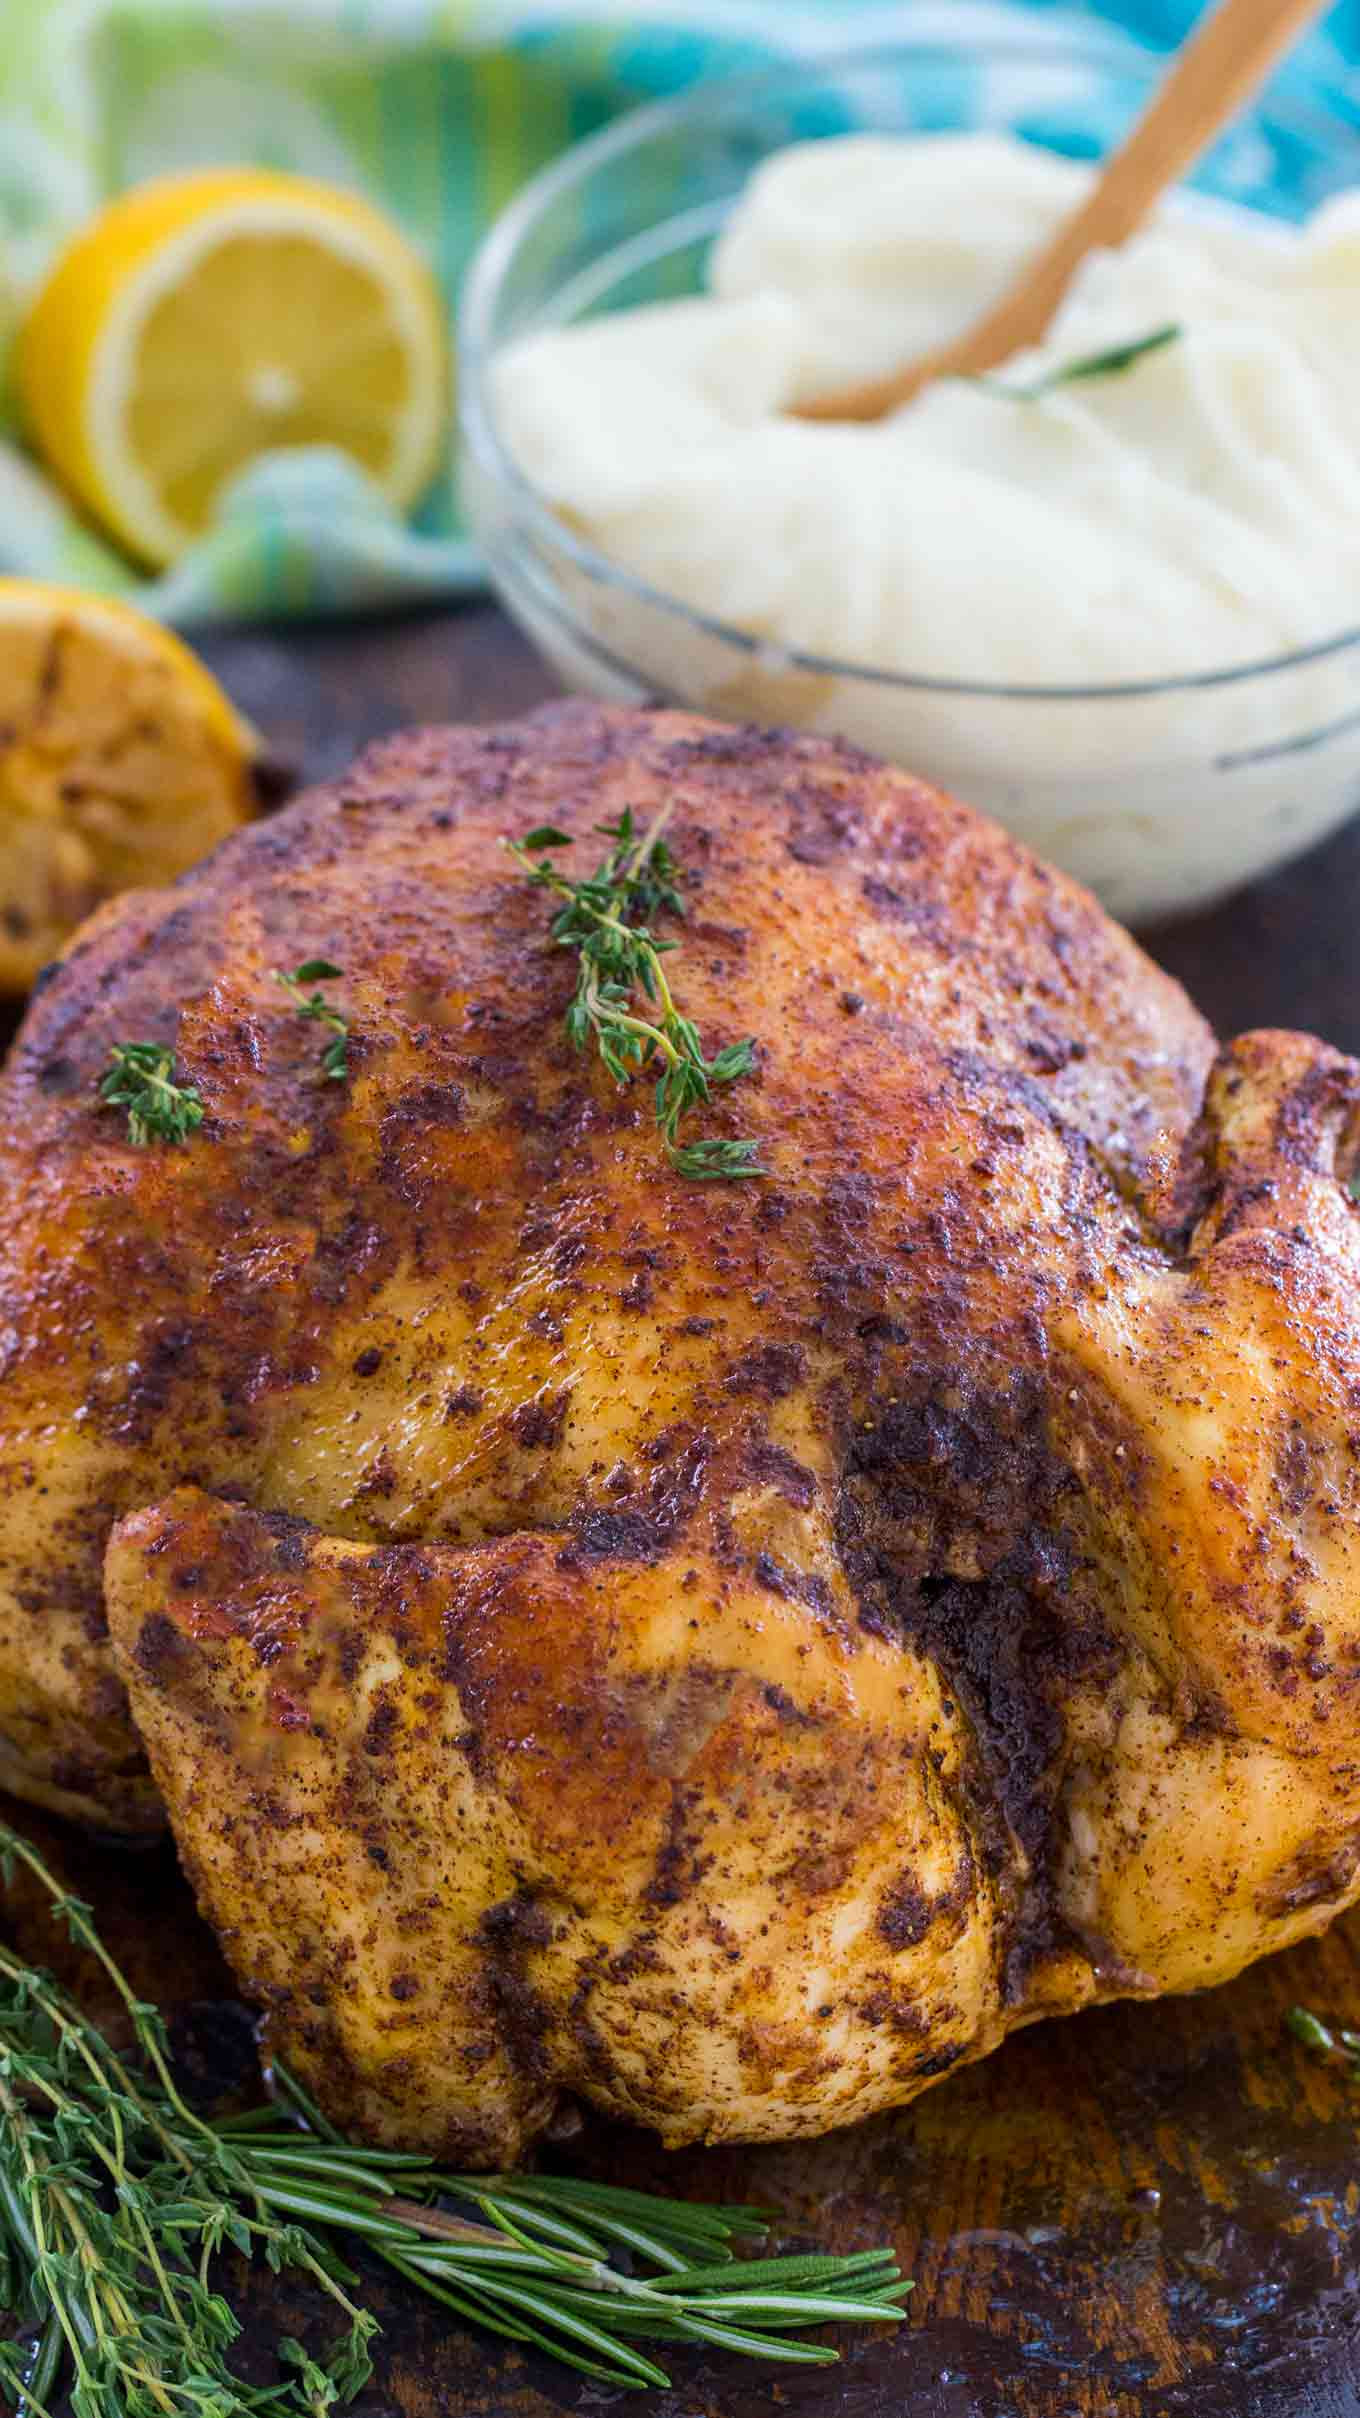 Instant Pot whole Chicken Recipe Awesome Instant Pot whole Chicken Recipe Fresh or Frozen [video